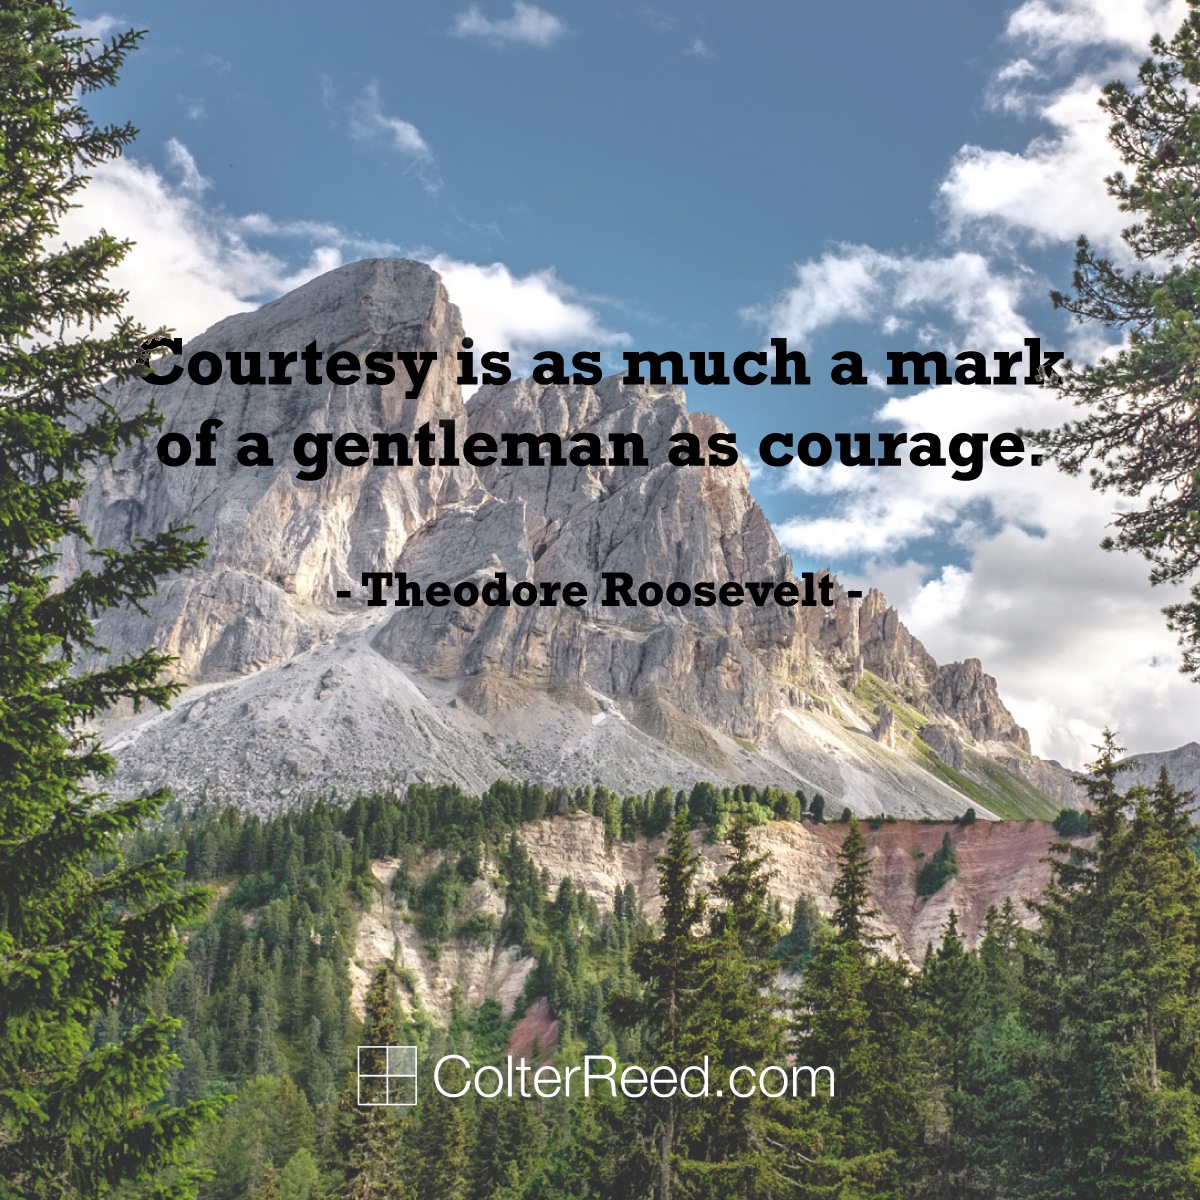 “Courtesy is as much a mark of a gentleman as courage.” —Theodore Roosevelt